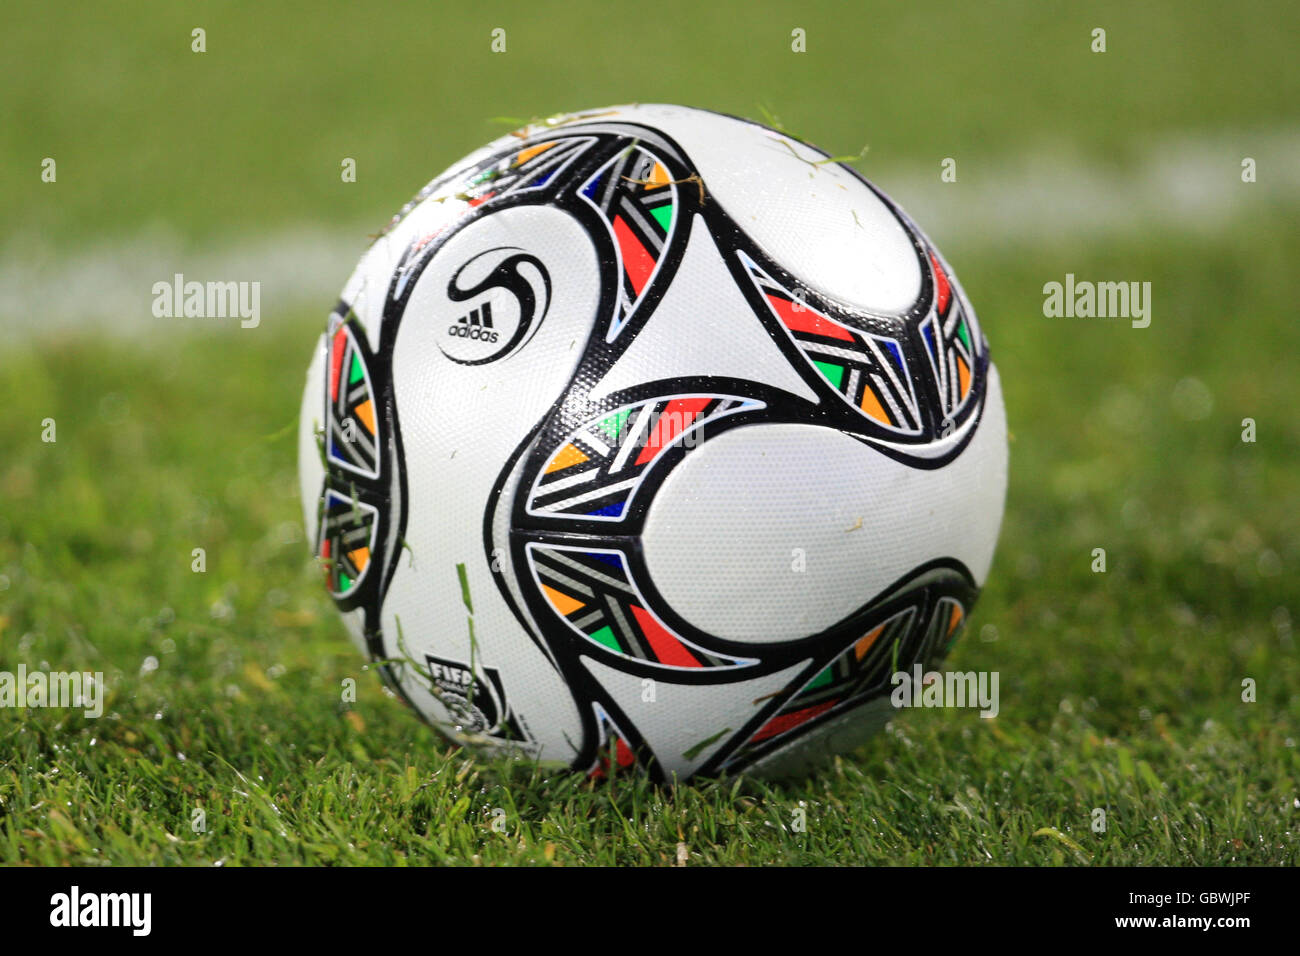 Soccer - Confederations Cup 2009 - Group B - Egypt v USA - Royal Bafokeng Stadium. A general view of a Confederations Cup official match ball Stock Photo